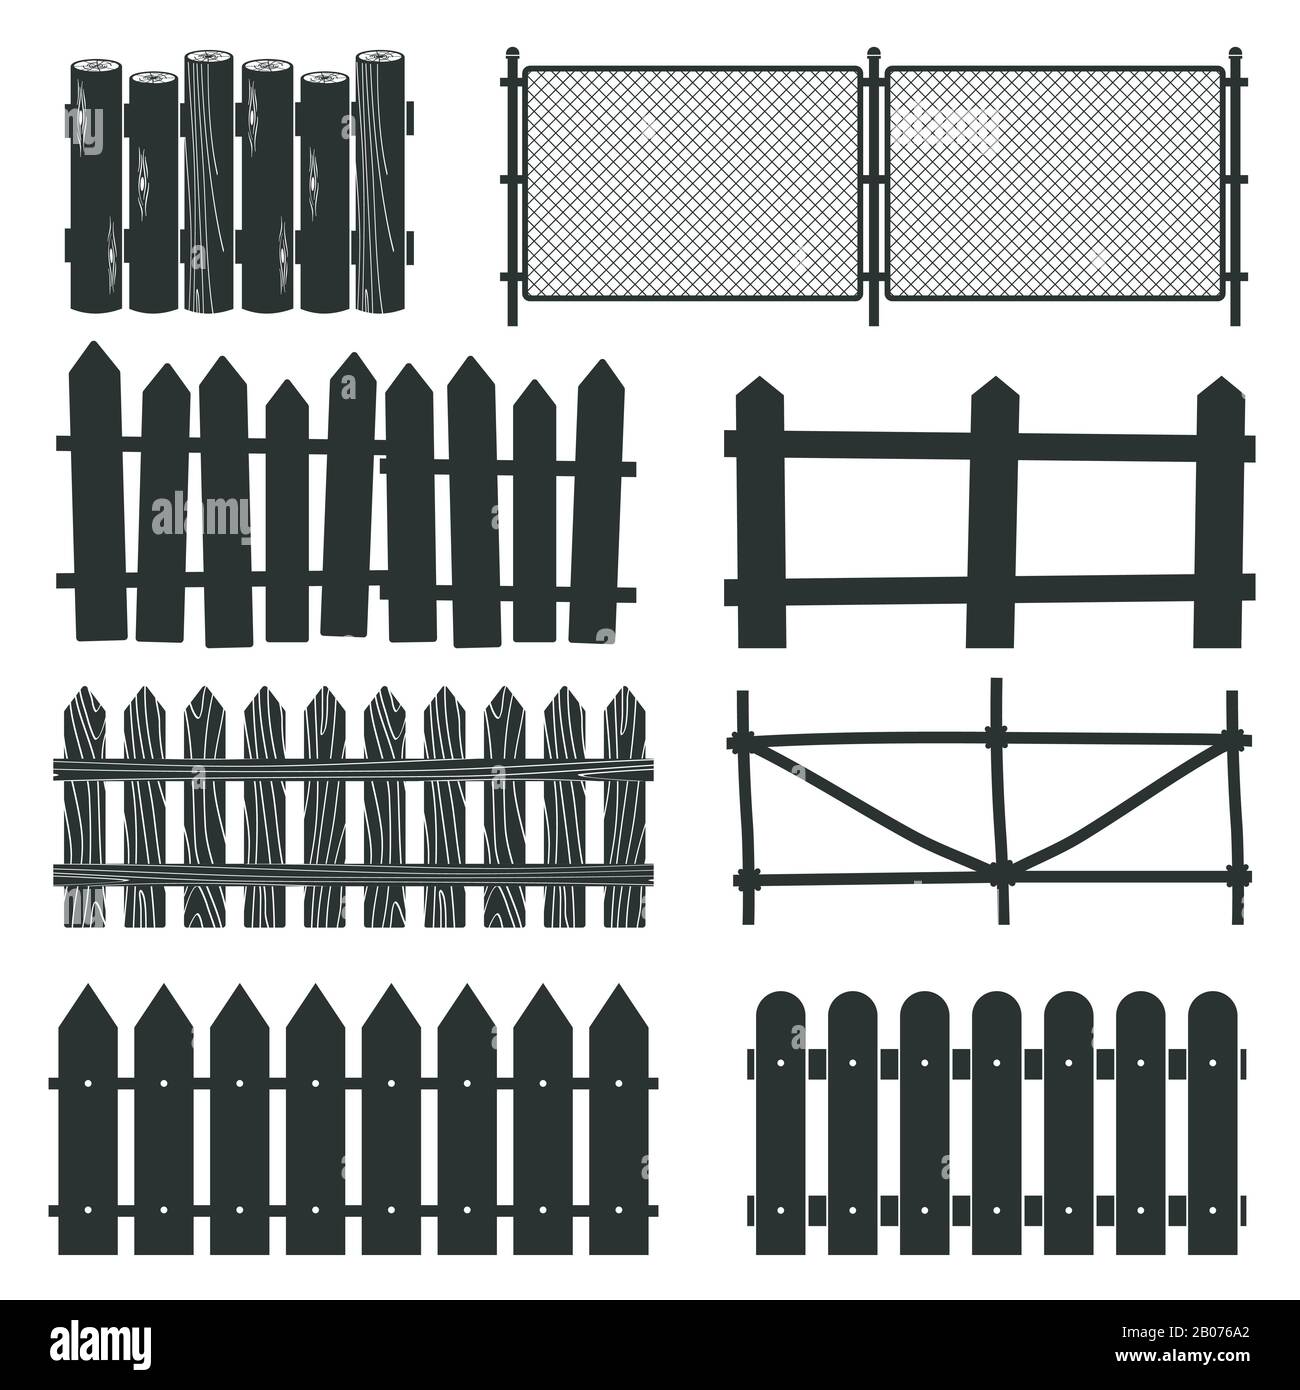 Rural wooden fences, pickets vector silhouettes. Illustration of paling straight for protection and security Stock Vector